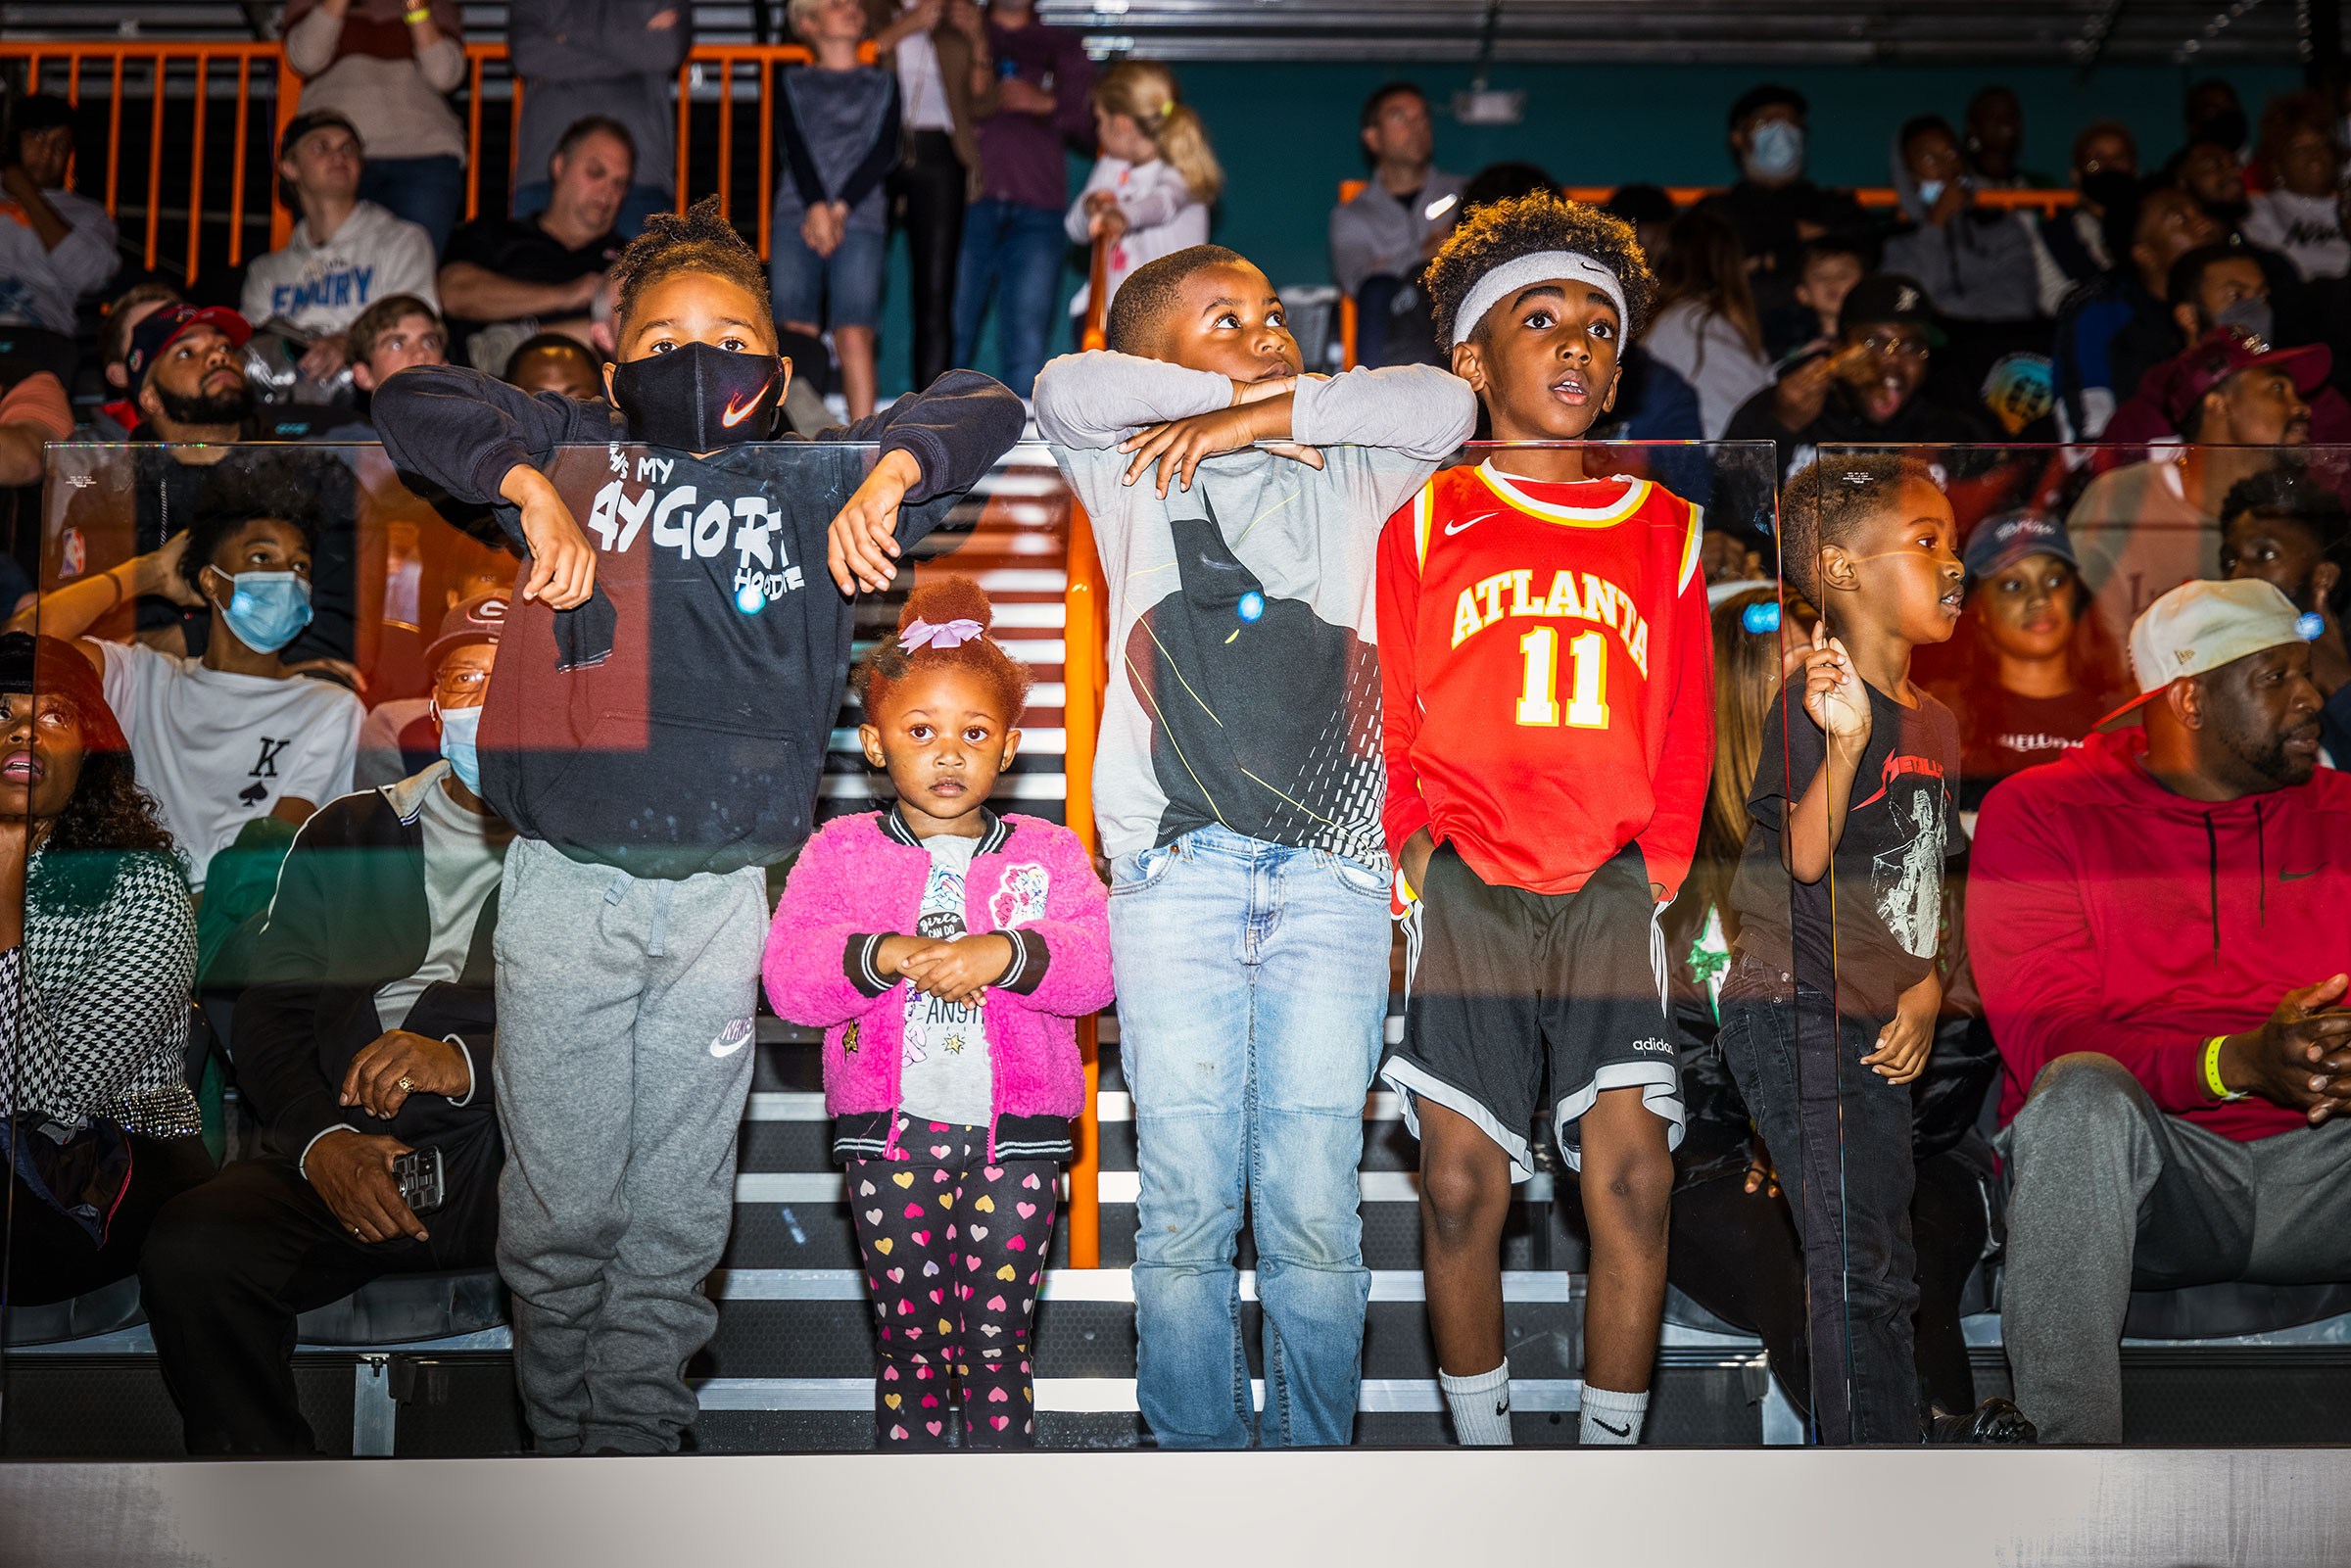 Young fans in the stands watch the action at the OTE arena. (Andrew Hetherington for TIME)